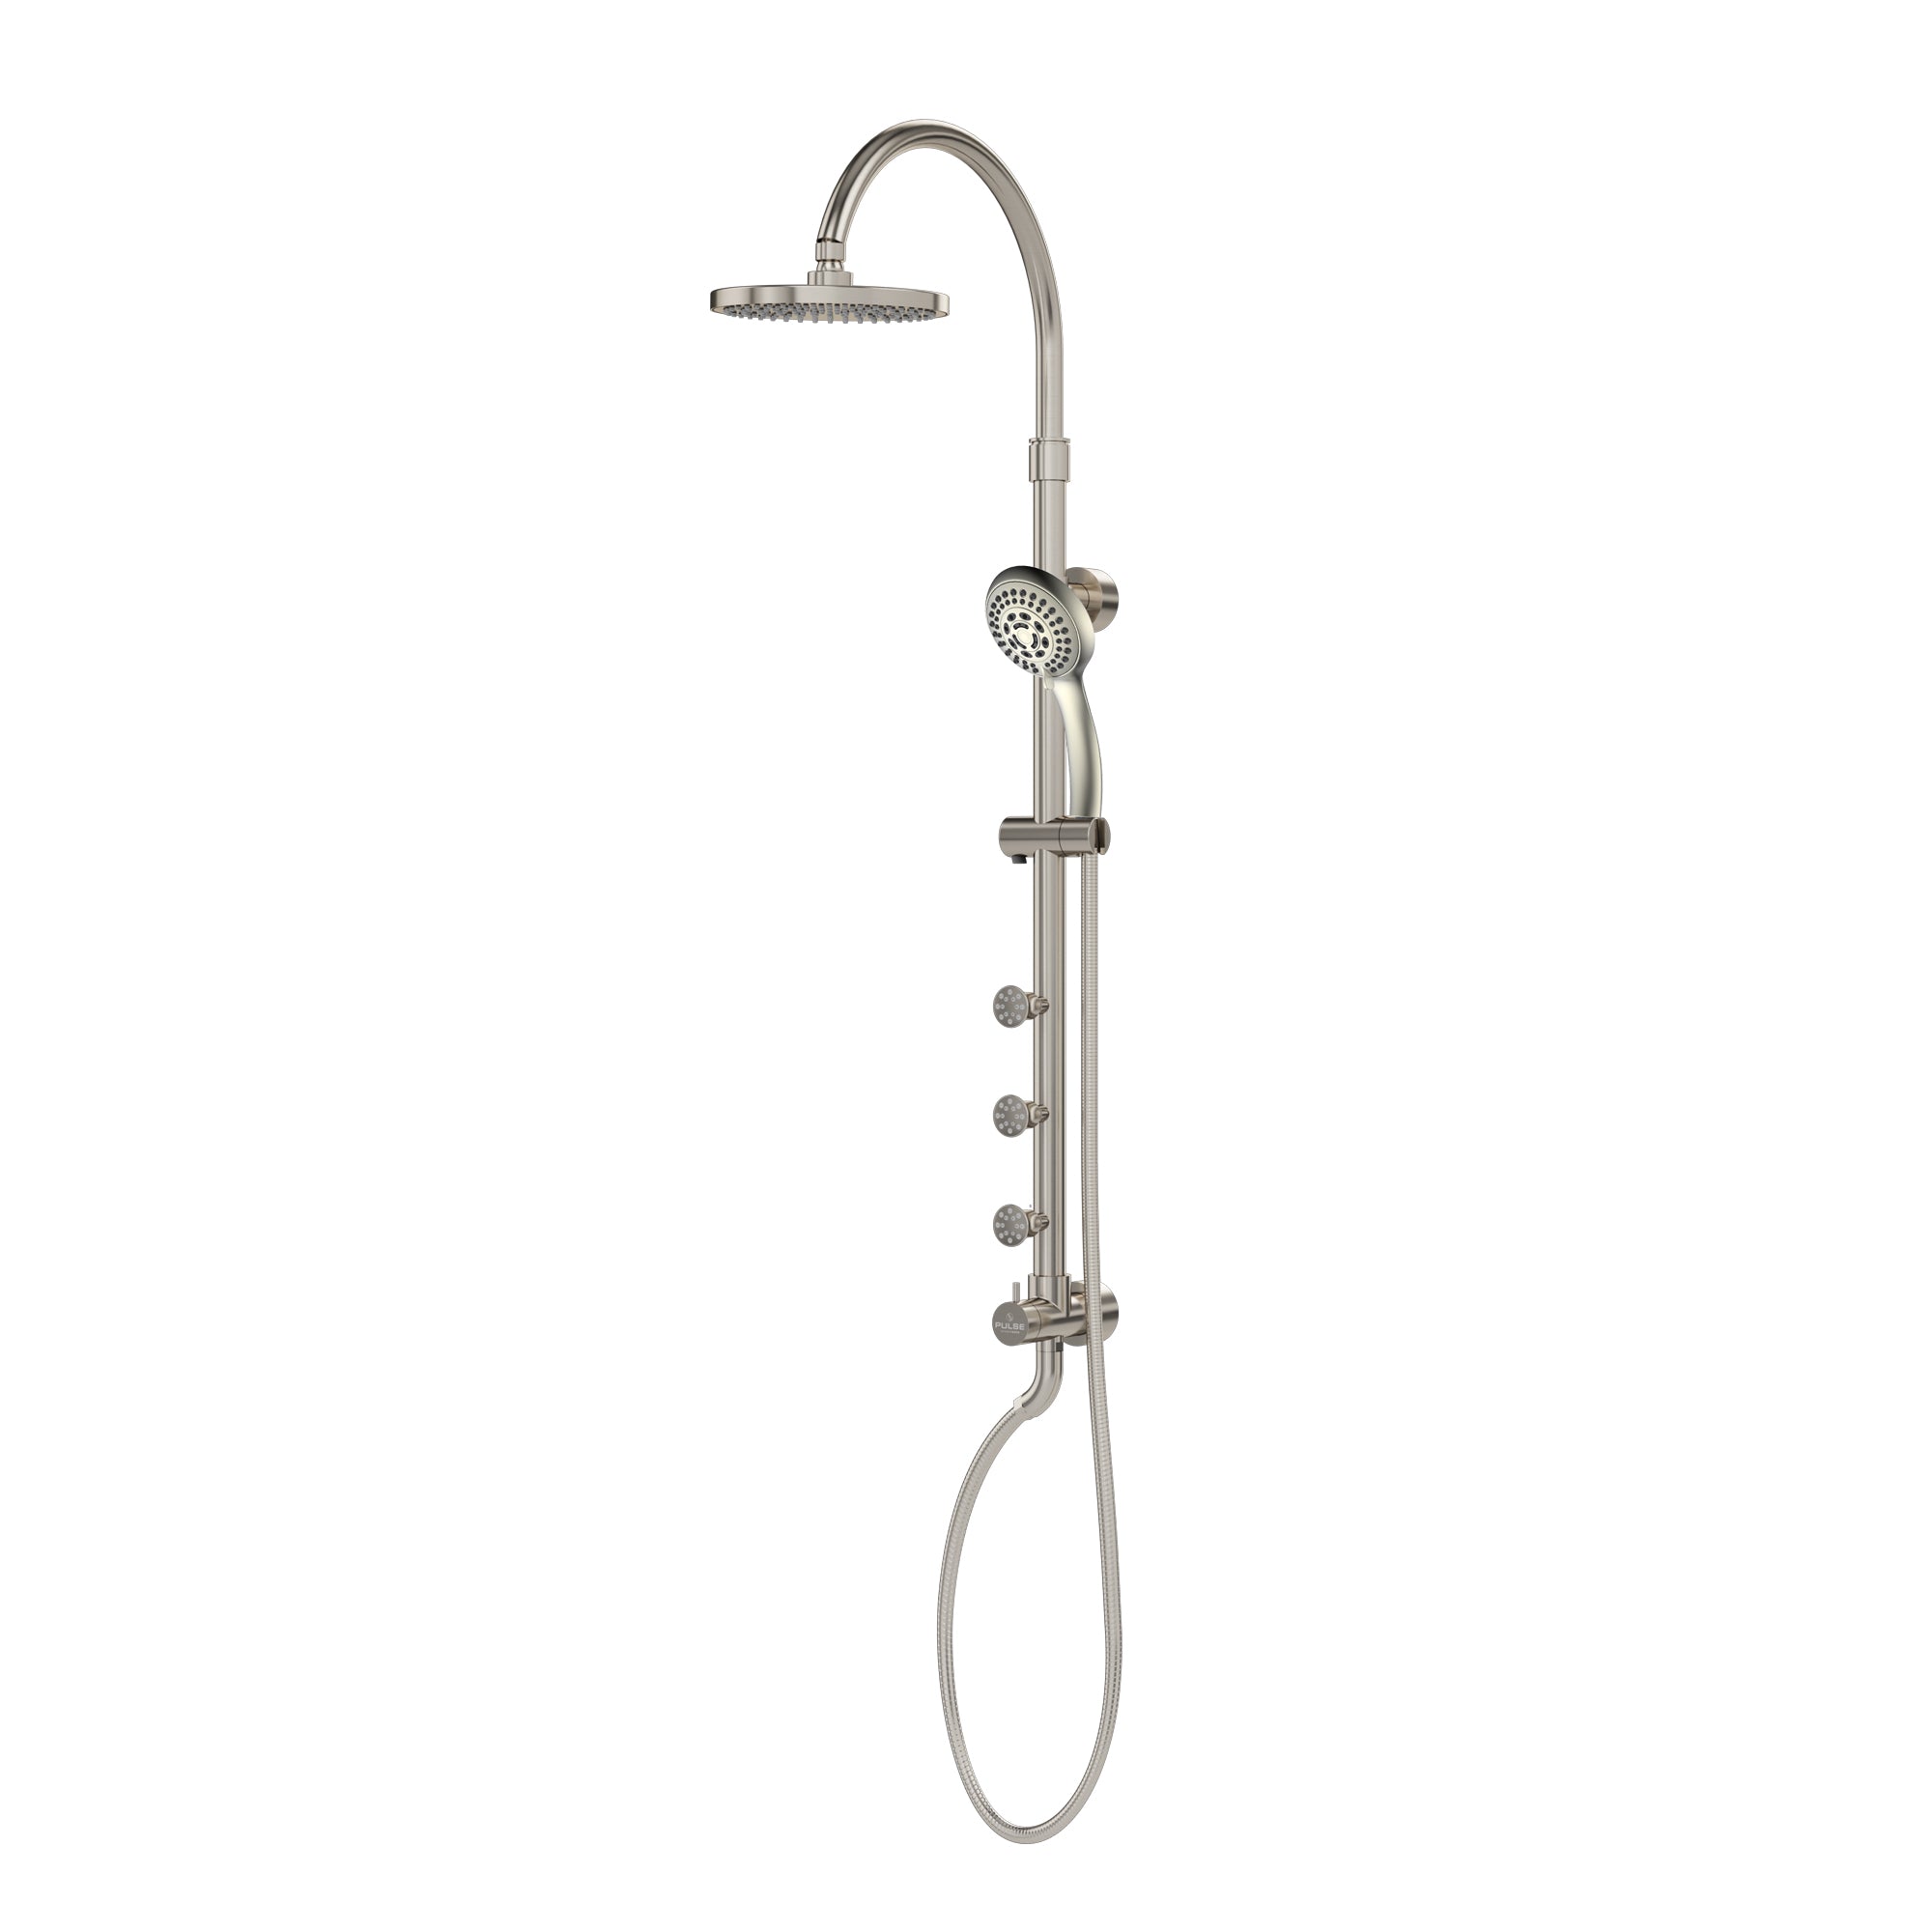 PULSE ShowerSpas Shower System - Riviera Shower System - with 8 inch rain showerhead with soft tips, Five-function hand shower with 59 inch double-interlocking stainless steel hose, Slide bar, Three body jets and diverter - Brushed Nickel - 7001 - Vital Hydrotherapy